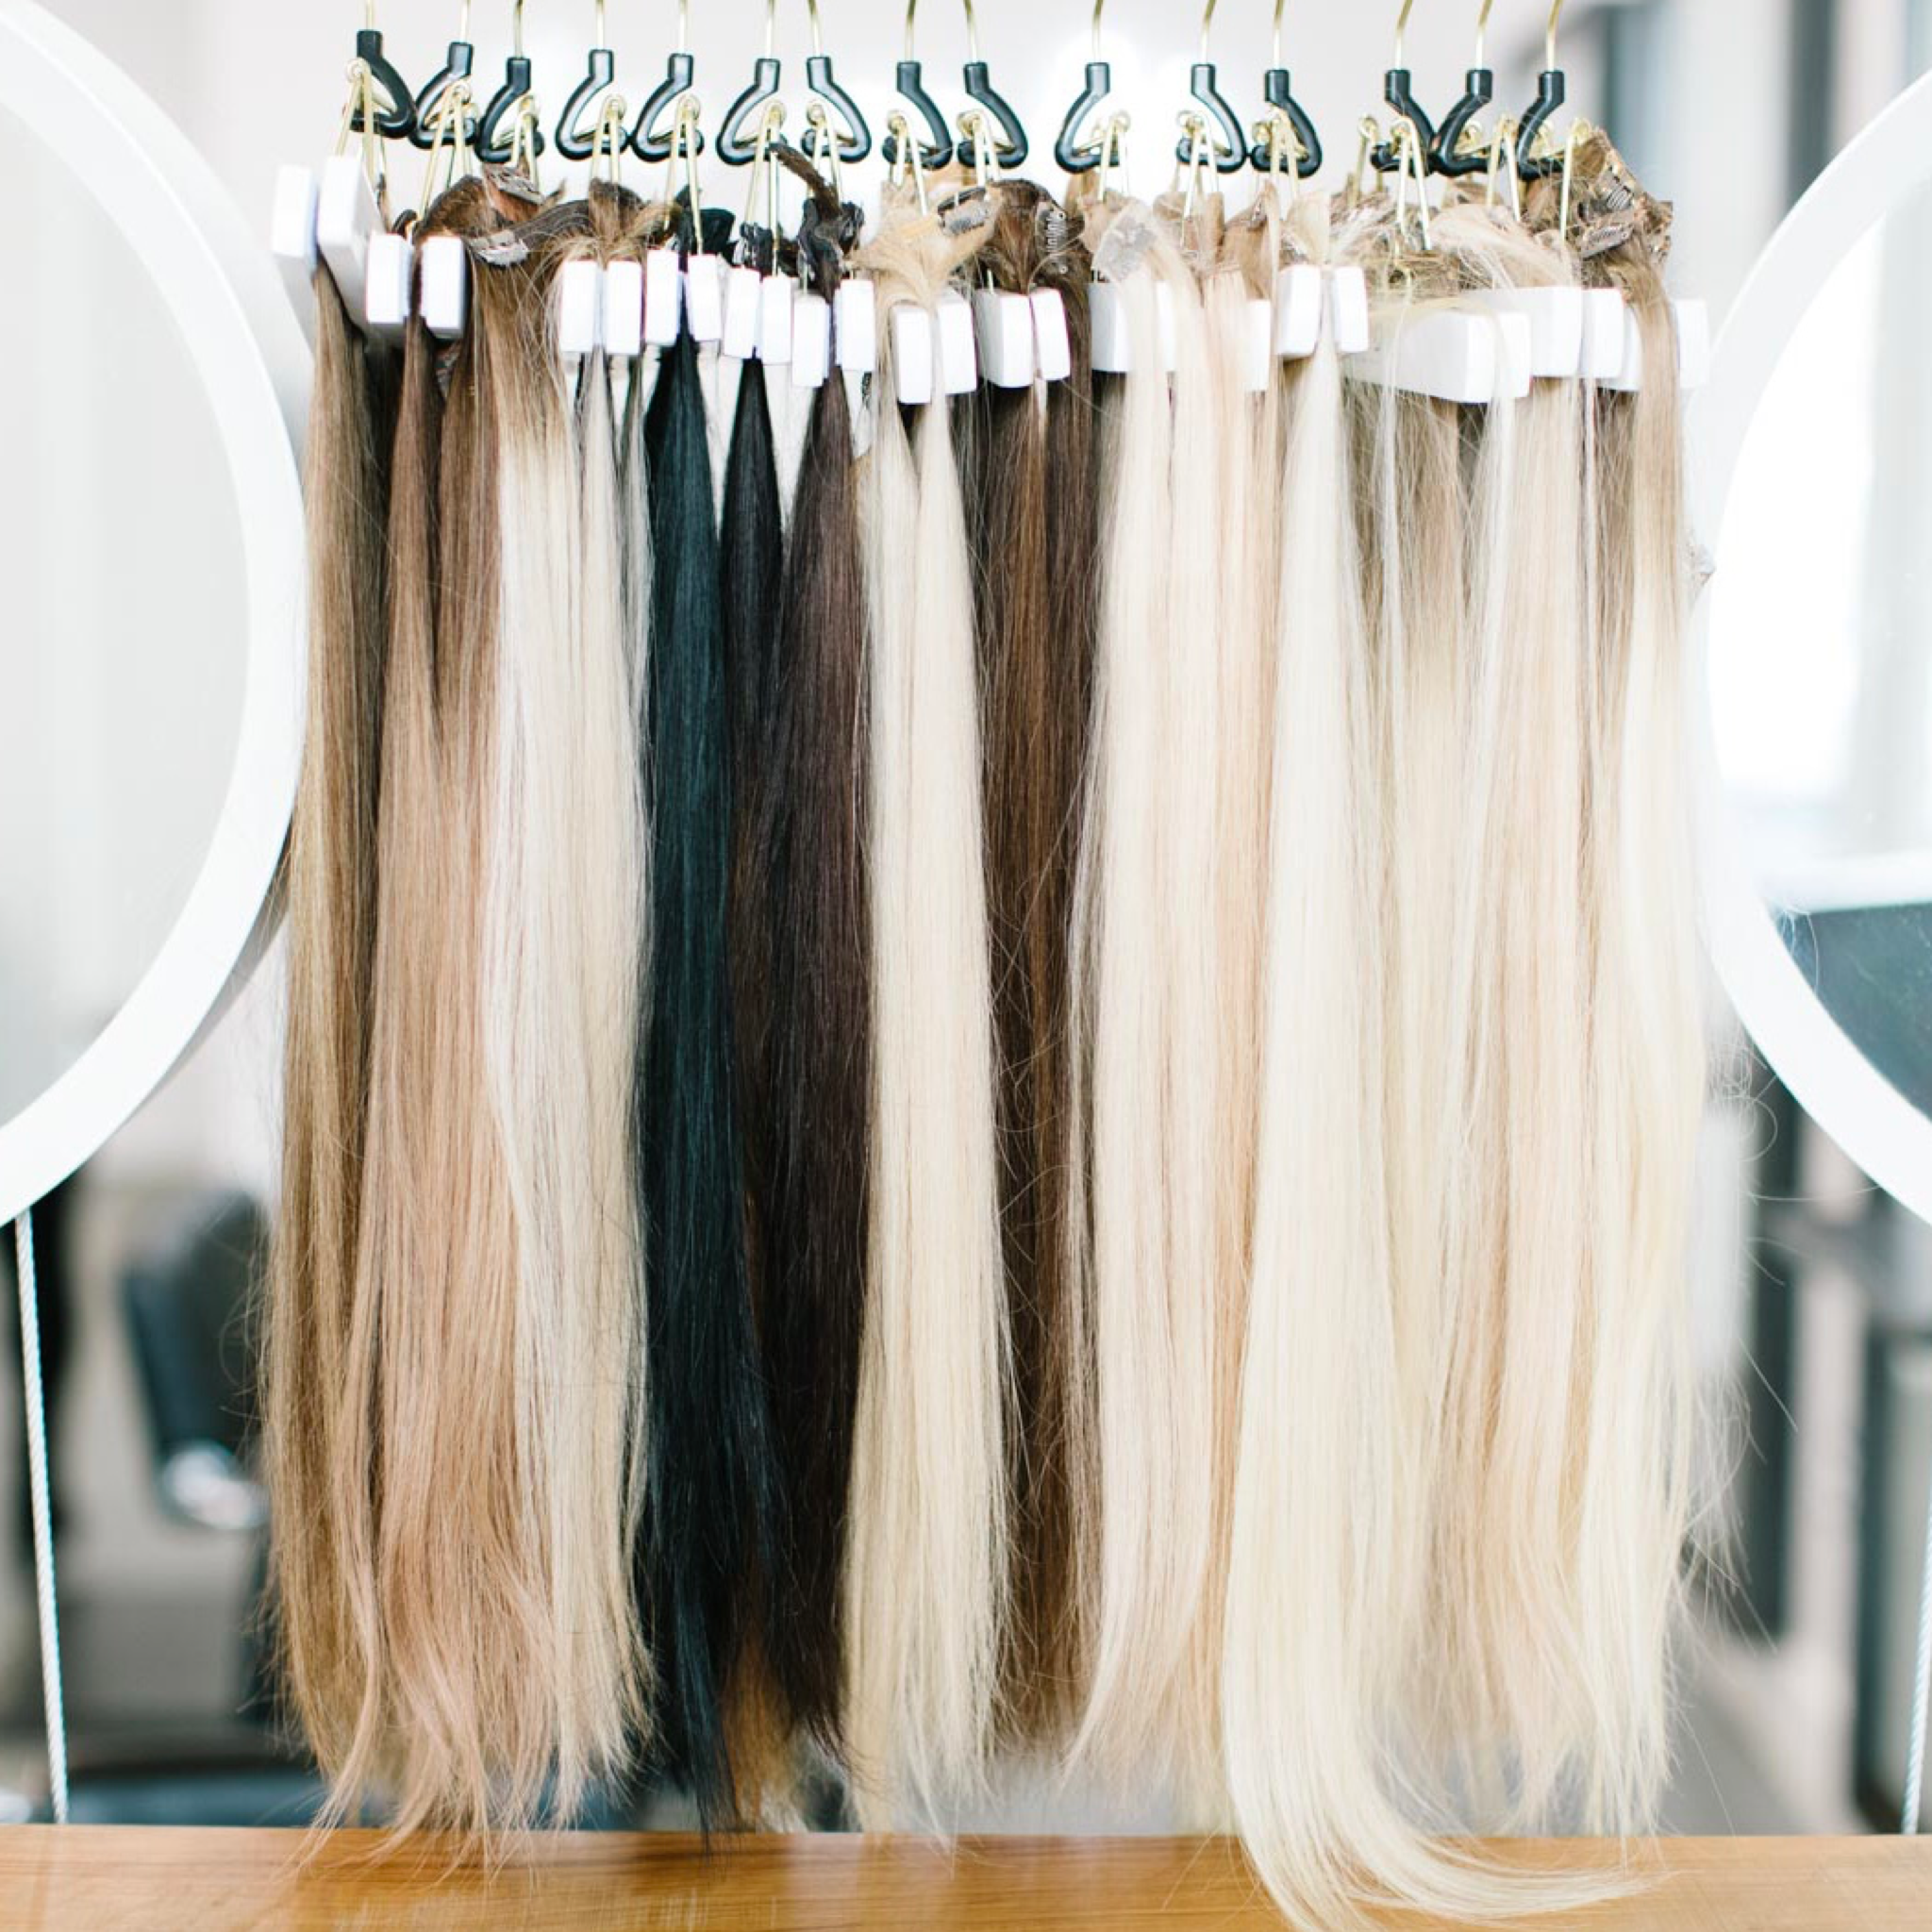 Here’s Where to Shop Our Laced Hair Storefronts